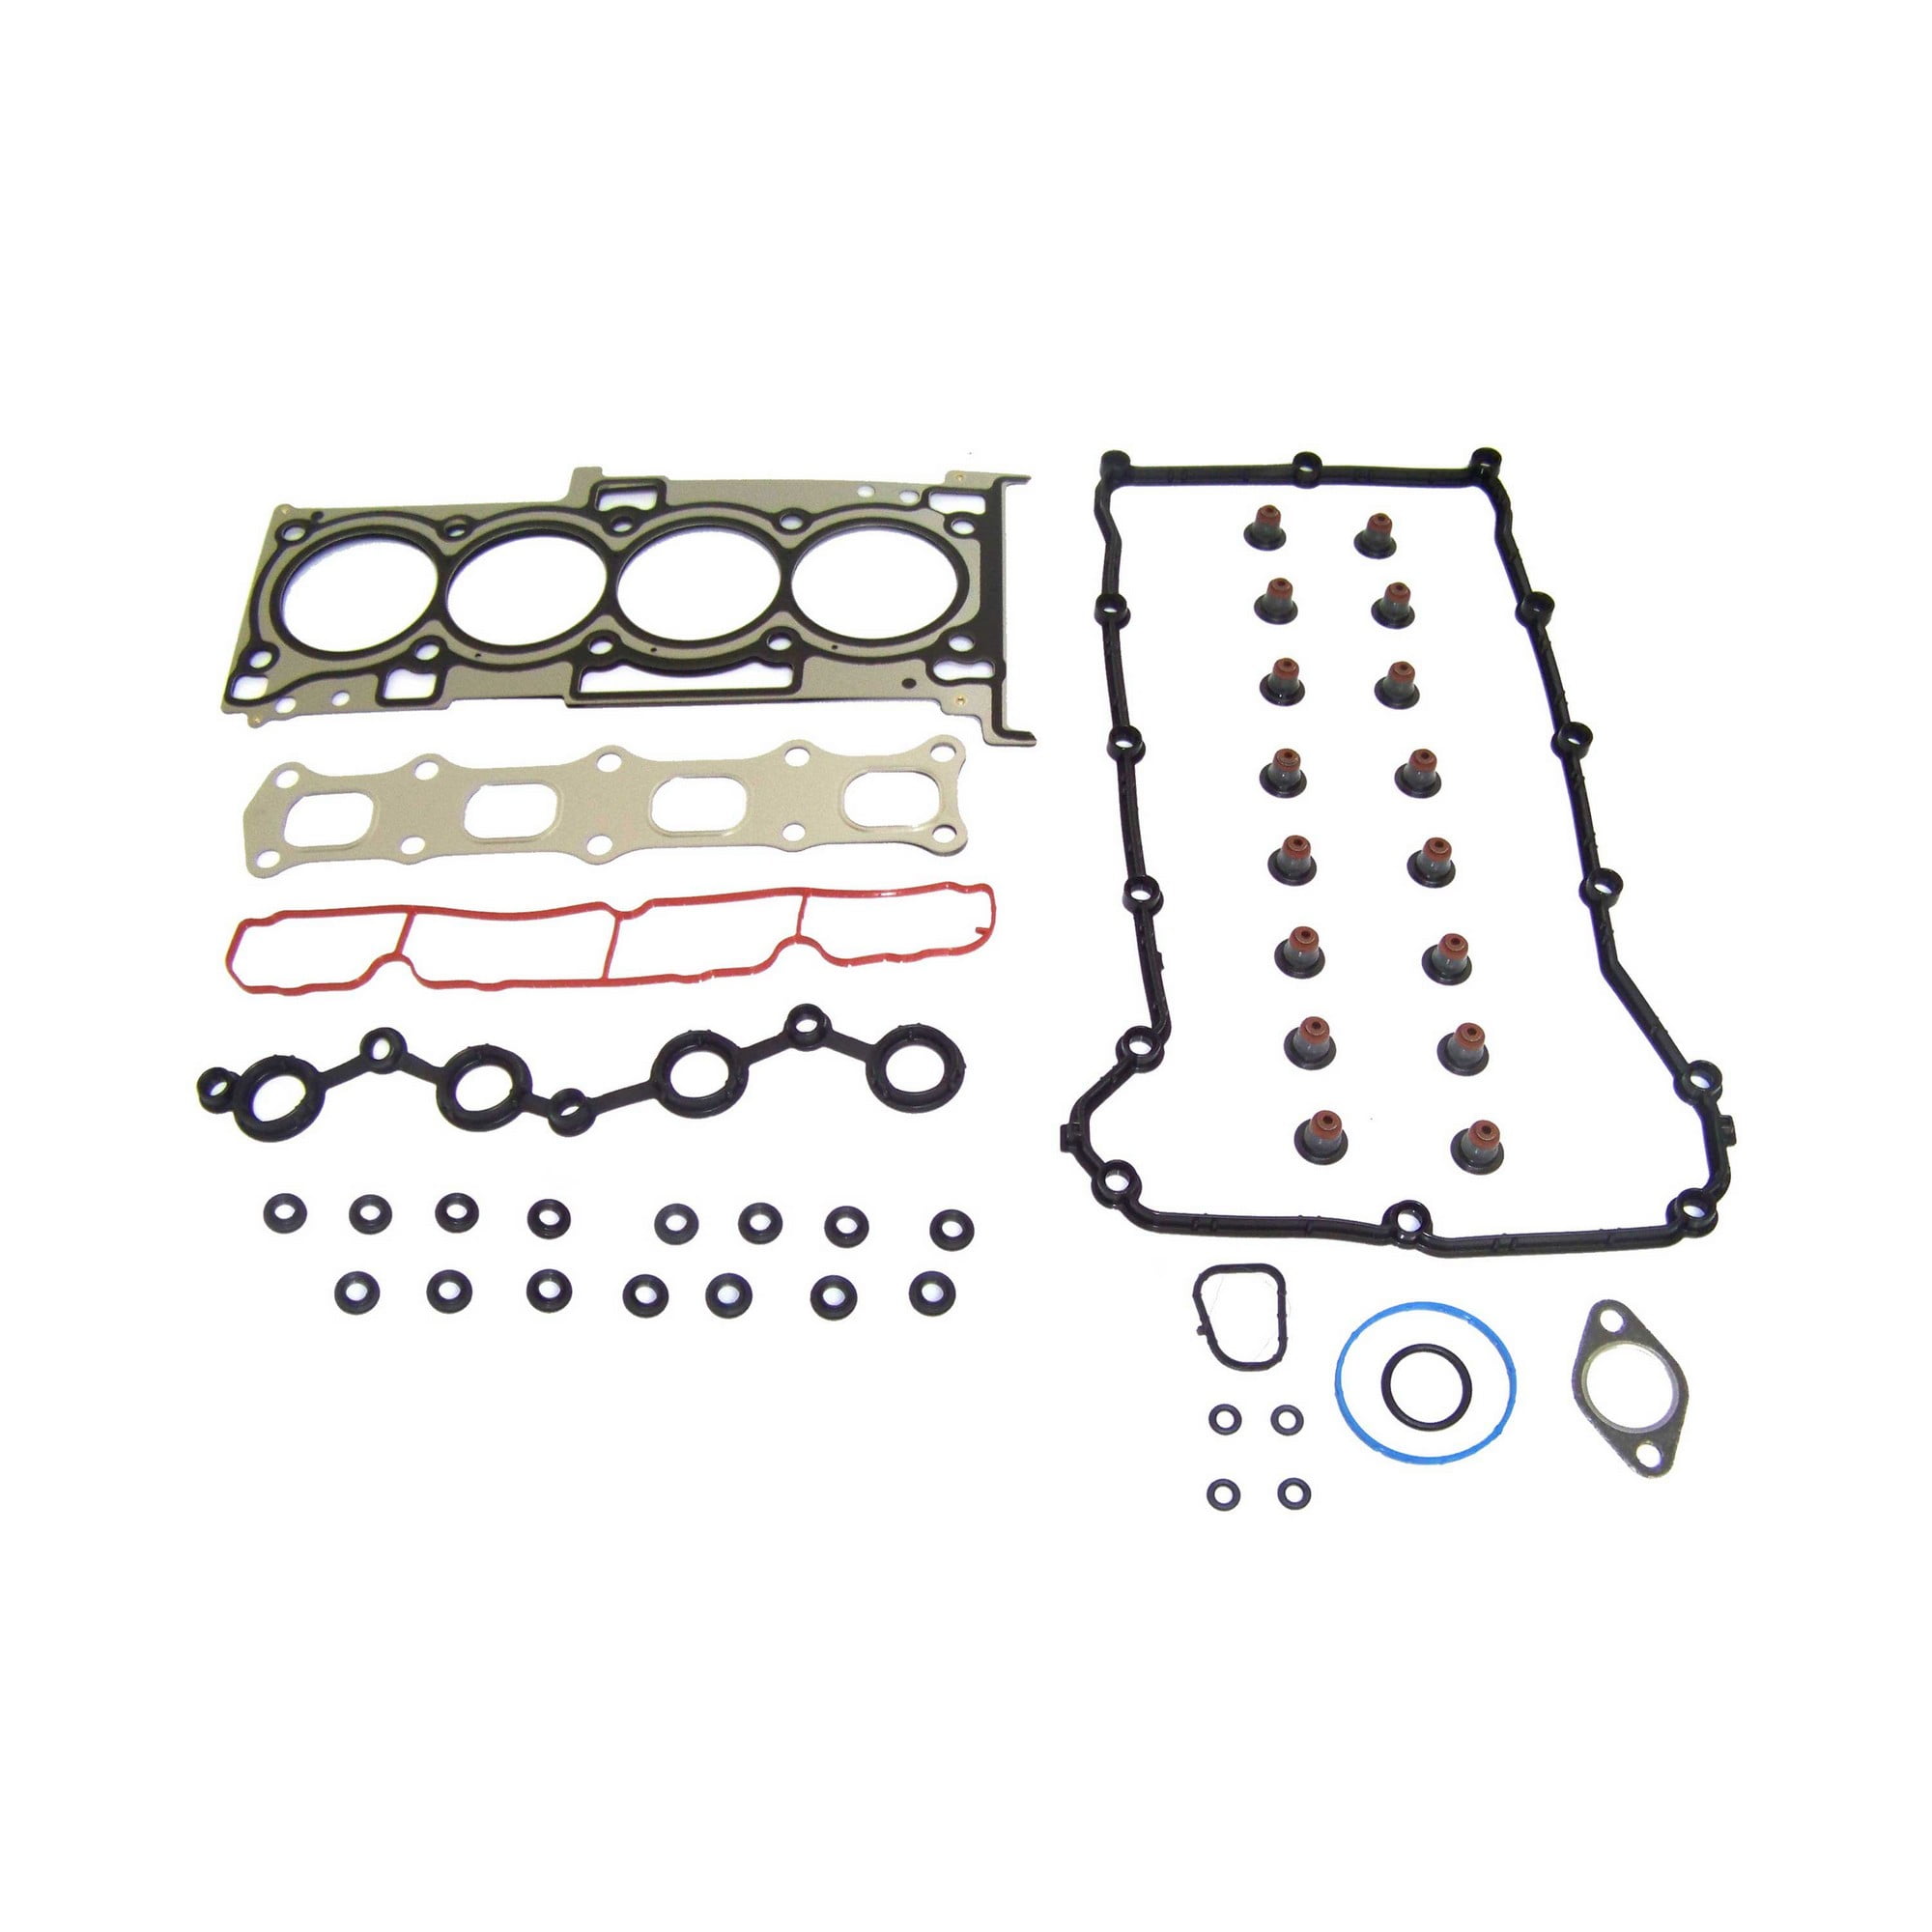 TUPARTS Automotive Head Gasket Sets Replacement for Chrysler 200 2.4 L